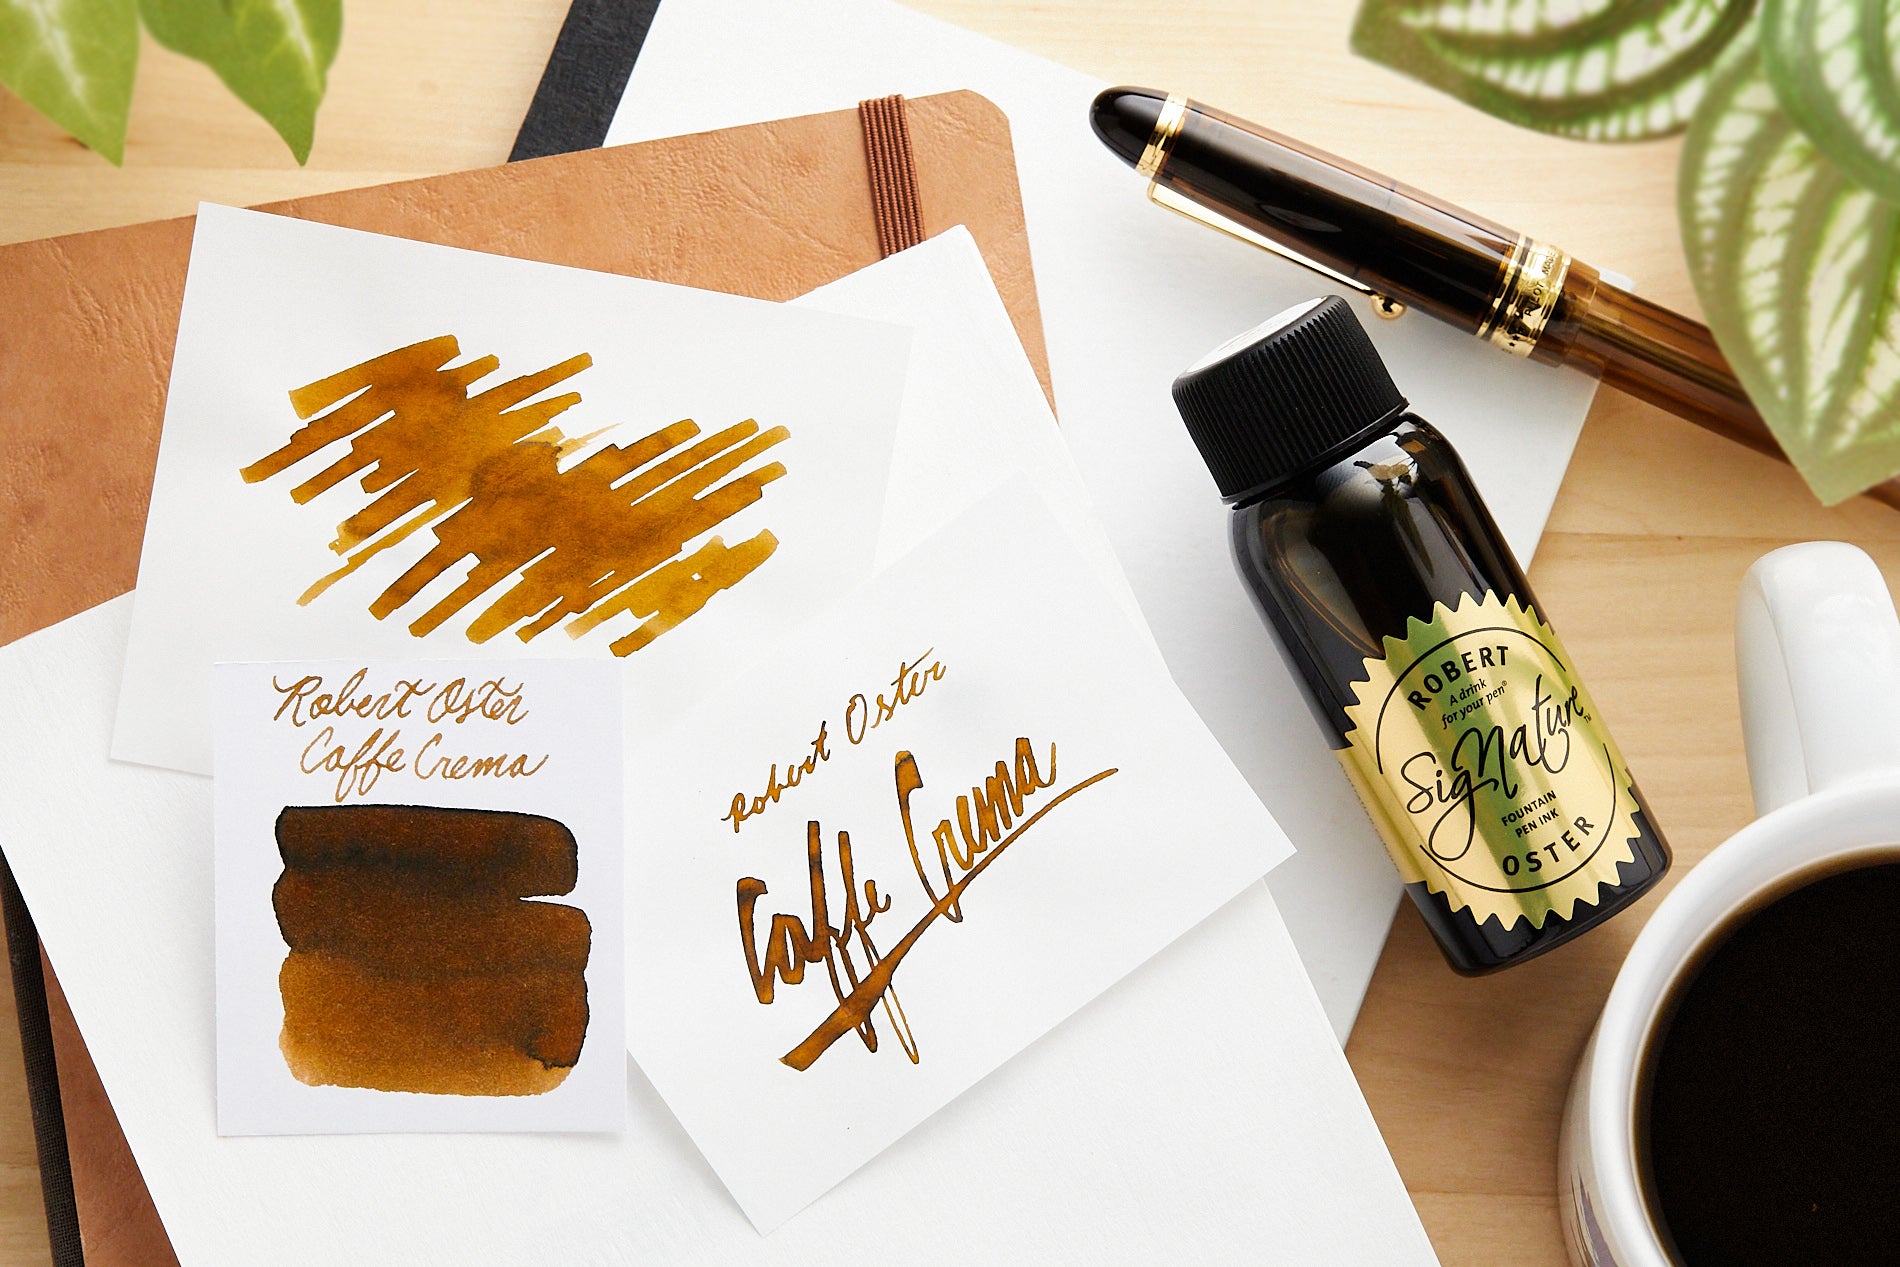 Robert Oster Caffe Crema Fountain Pen Ink bottle,  writing sample and swab on pale wood background